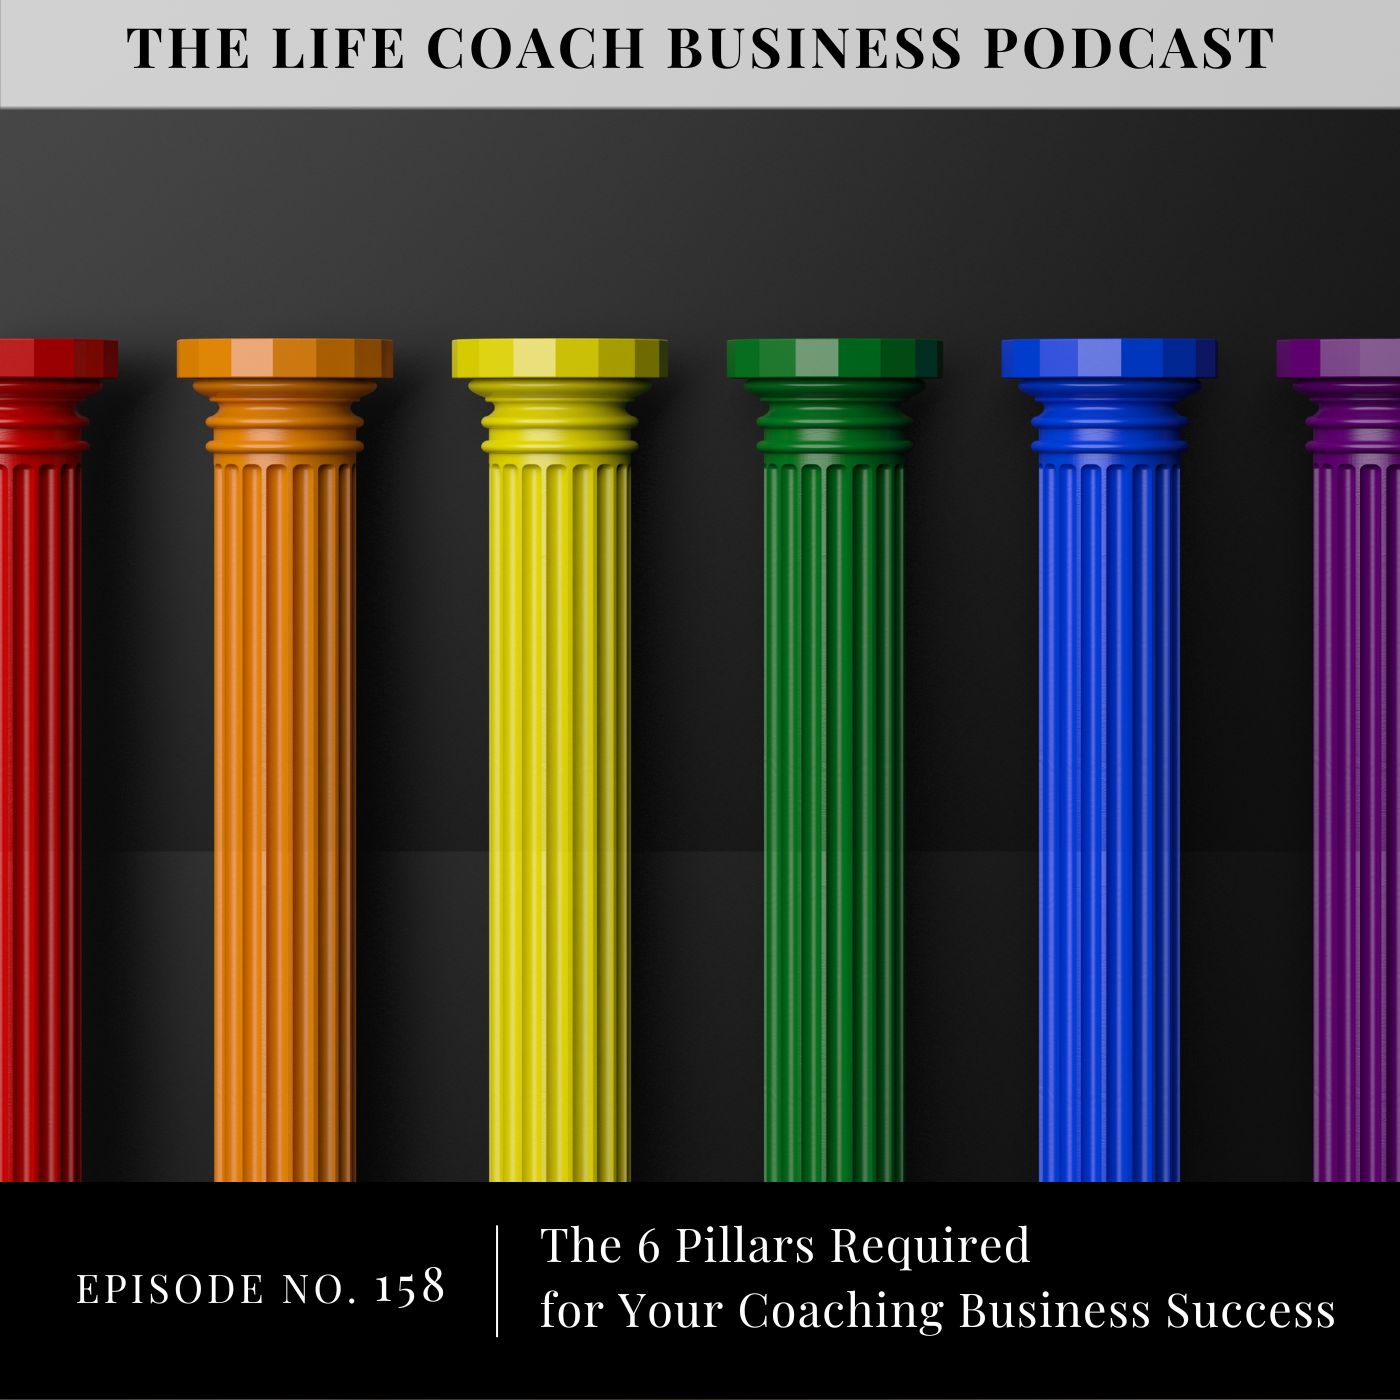 Ep 158 The 6 Pillars Required for Your Coaching Business Success